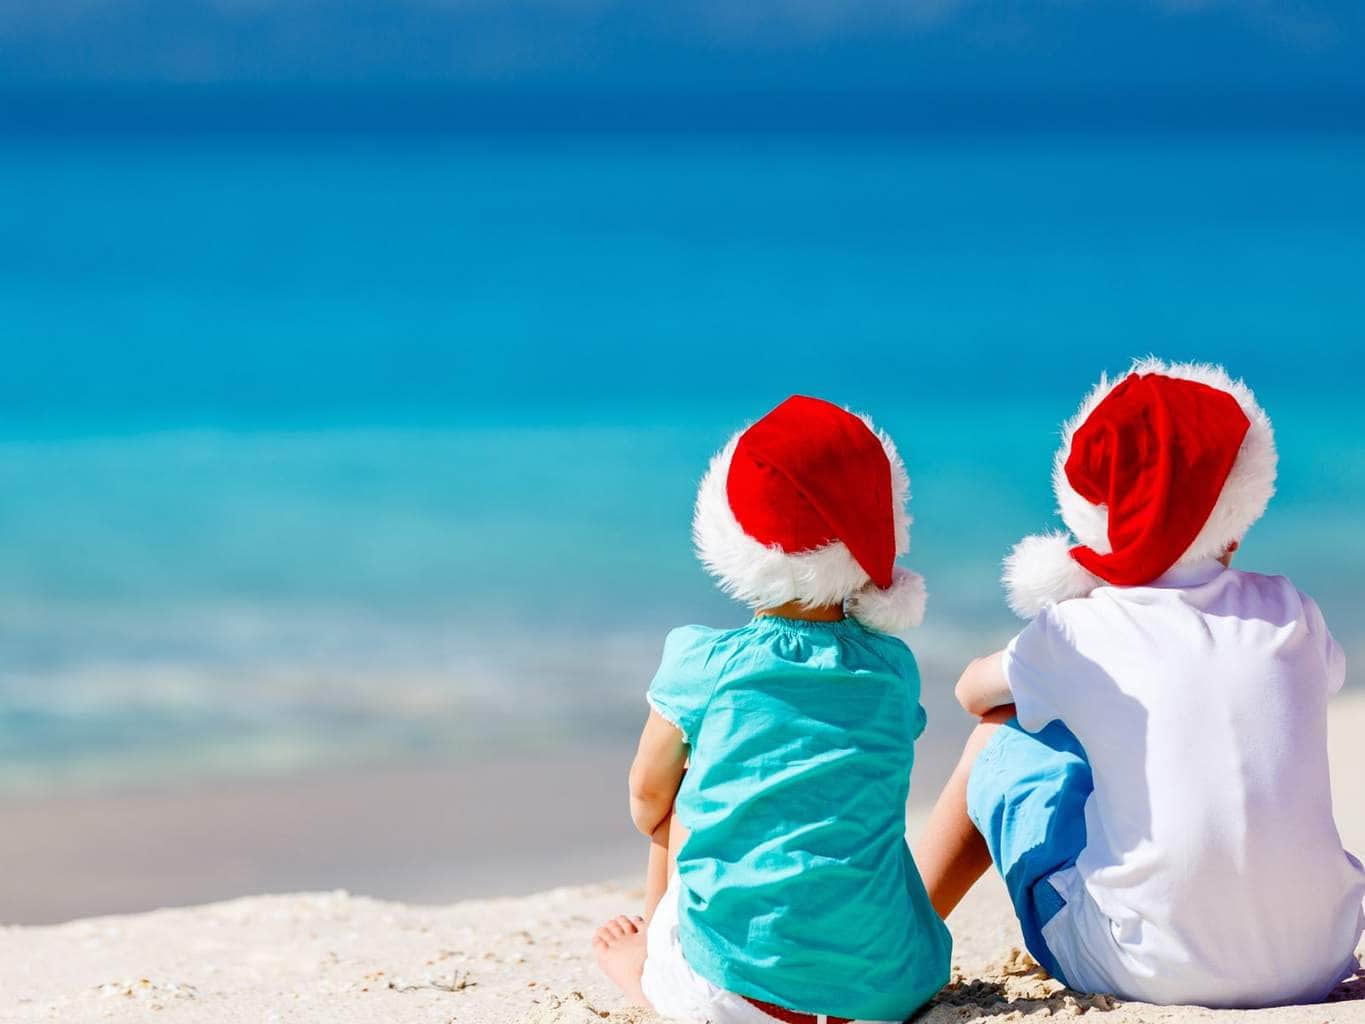 Why do we continue to gift our children toys that just become "objects and obstacles" in our home? This holiday season, think bigger and better. Focusing on making memories instead of searching the shelves and turn your holiday goals towards more family vacations and forget about the holiday gifts.